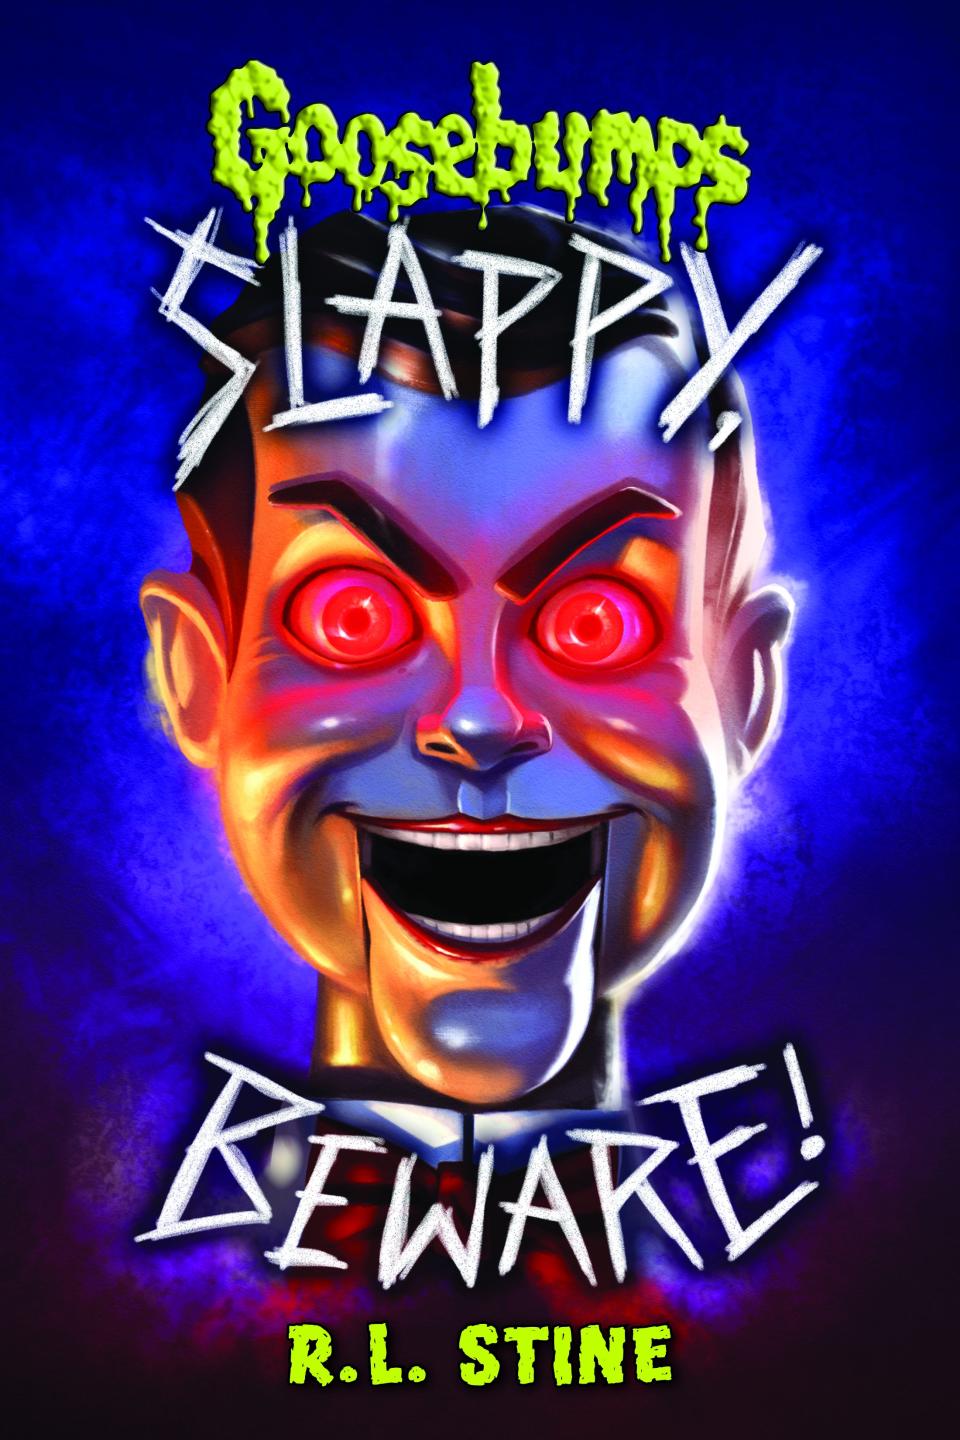 "Slappy Beware" by R.L. Stine will be released in September.